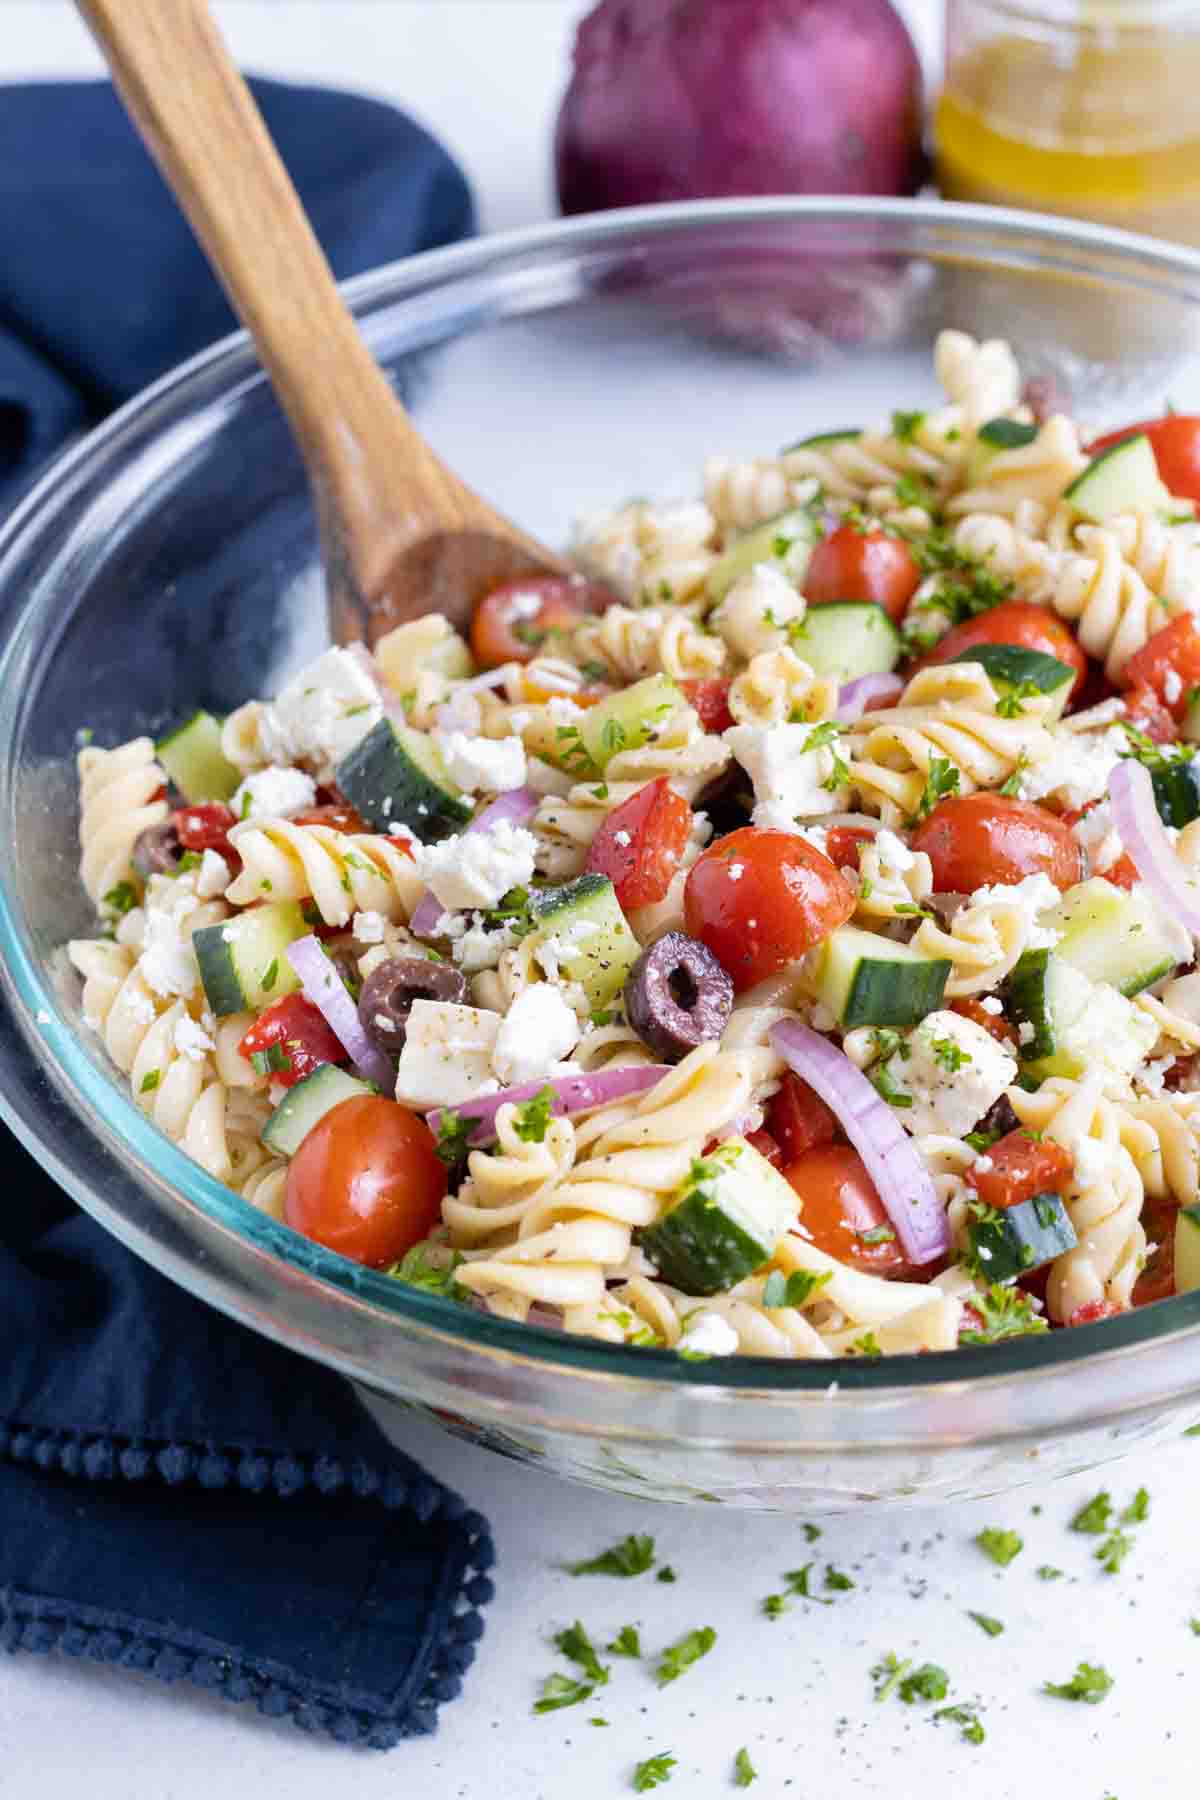 A big bowl of flavorful pasta salad is served for a BBQ side dish.